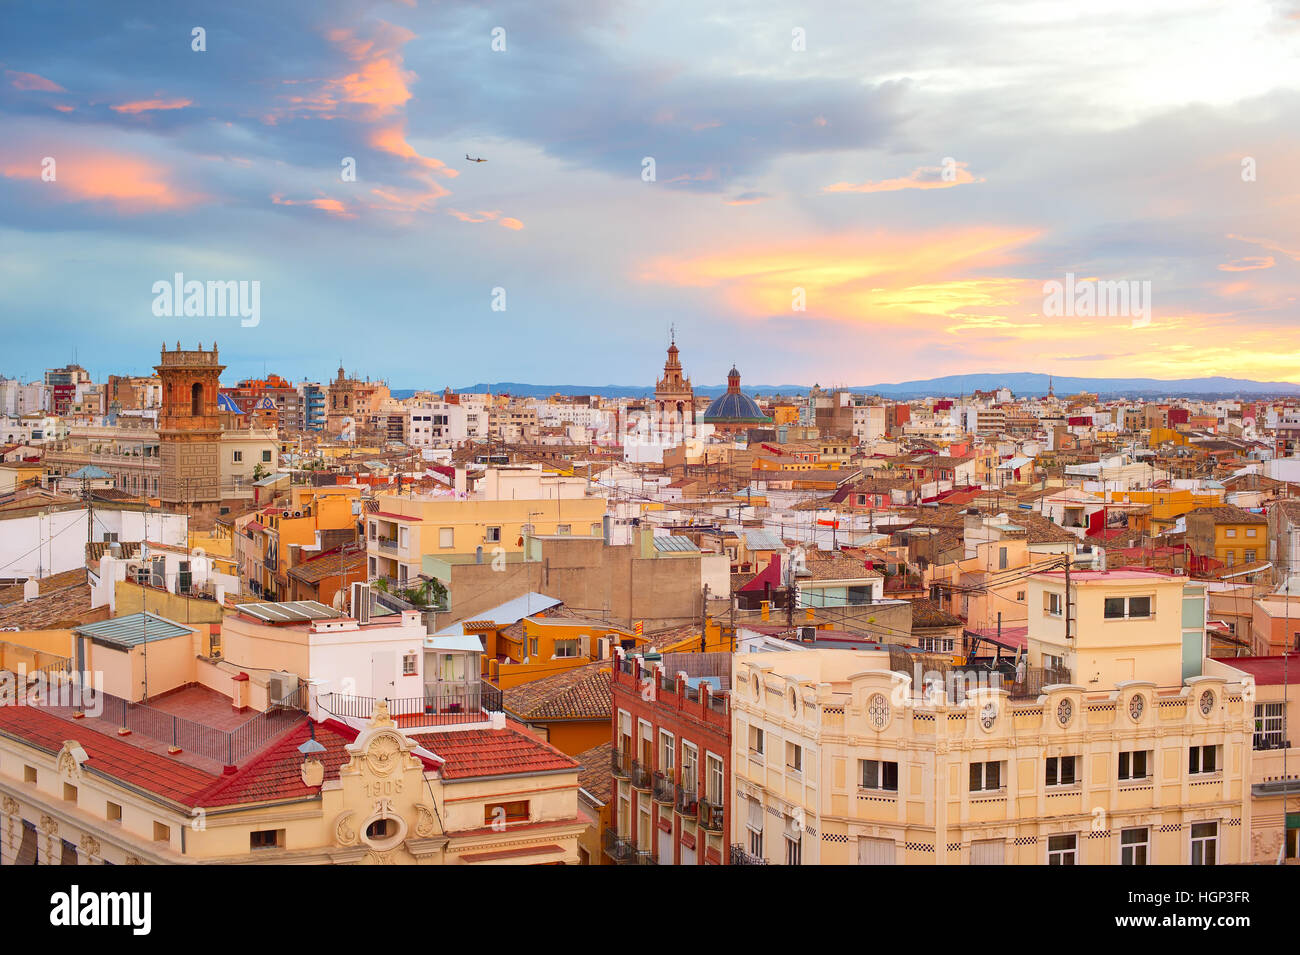 Old Town of Valencia at sunset. Plane flying in the sky. Spain Stock Photo